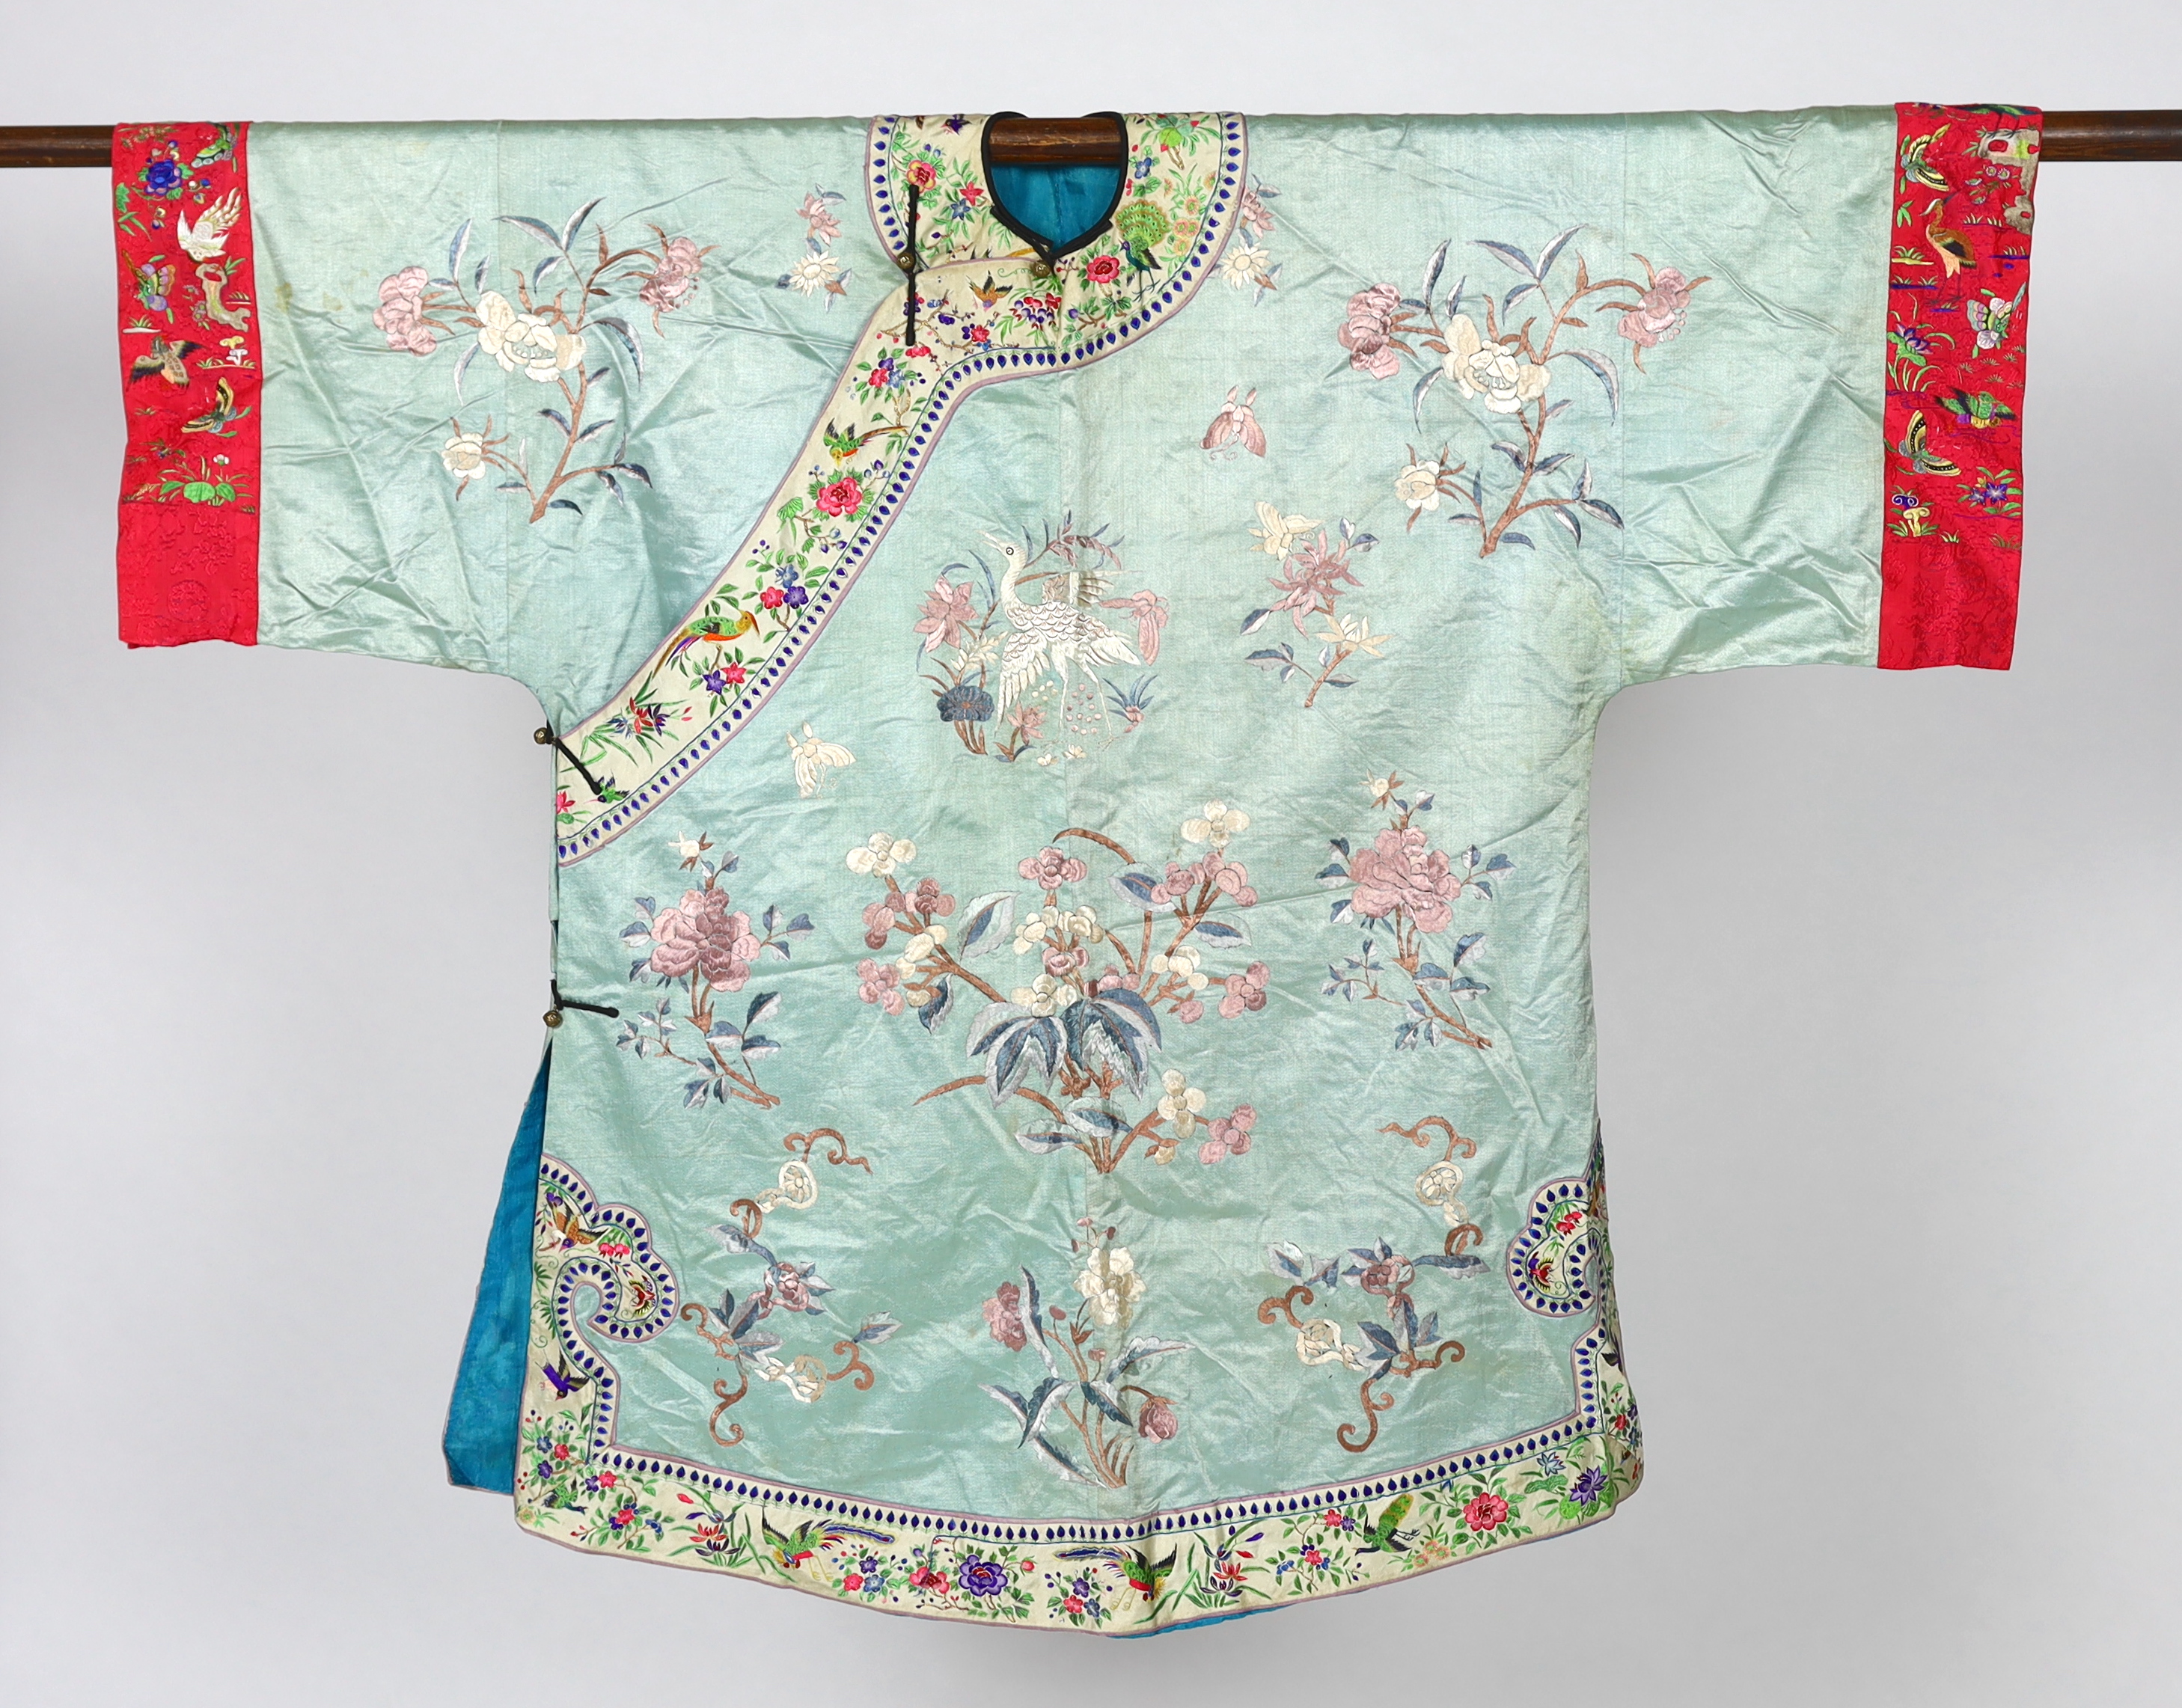 An early 20th century Chinese silk embroidered turquoise robe, embroidered in pastel silk with butterflies and flowers all over, polychrome embroidered braiding edged with lilac and bright pink sleeve bands embroidered w